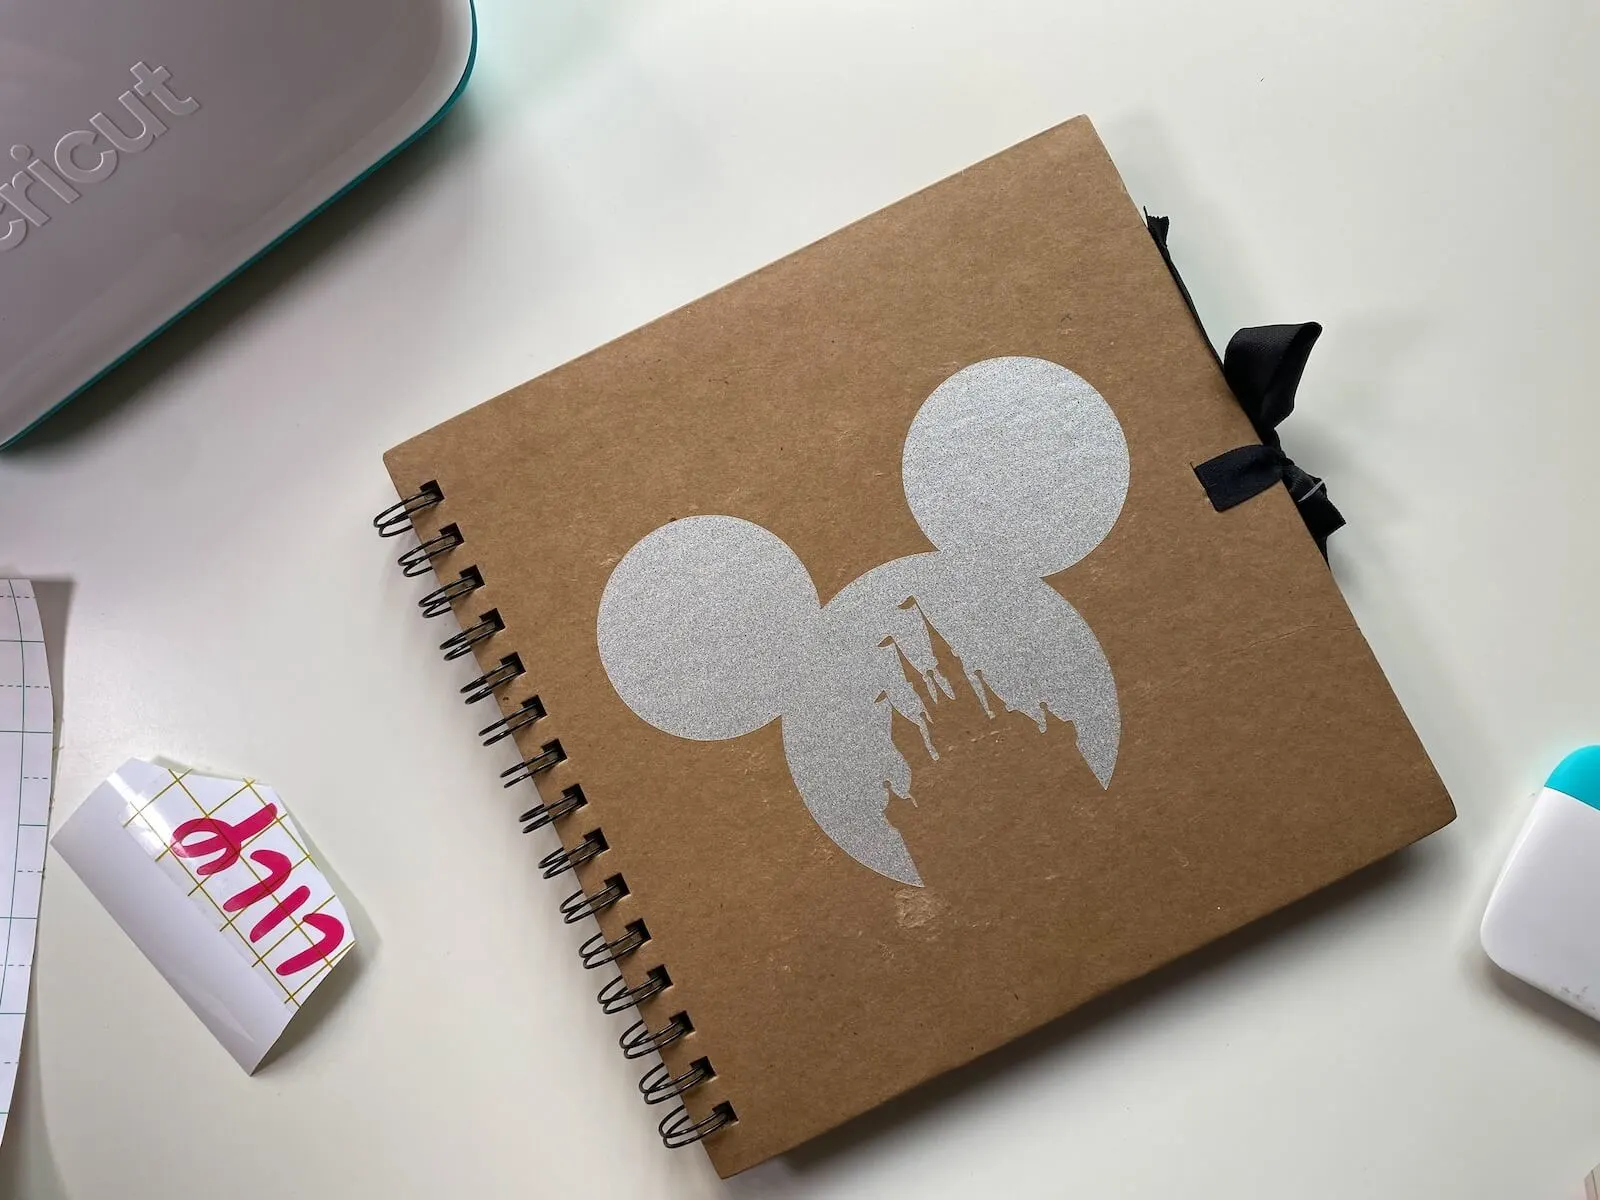 Disney HOW-TO! Decorate Your Own DIY Adventure Book Inspired by